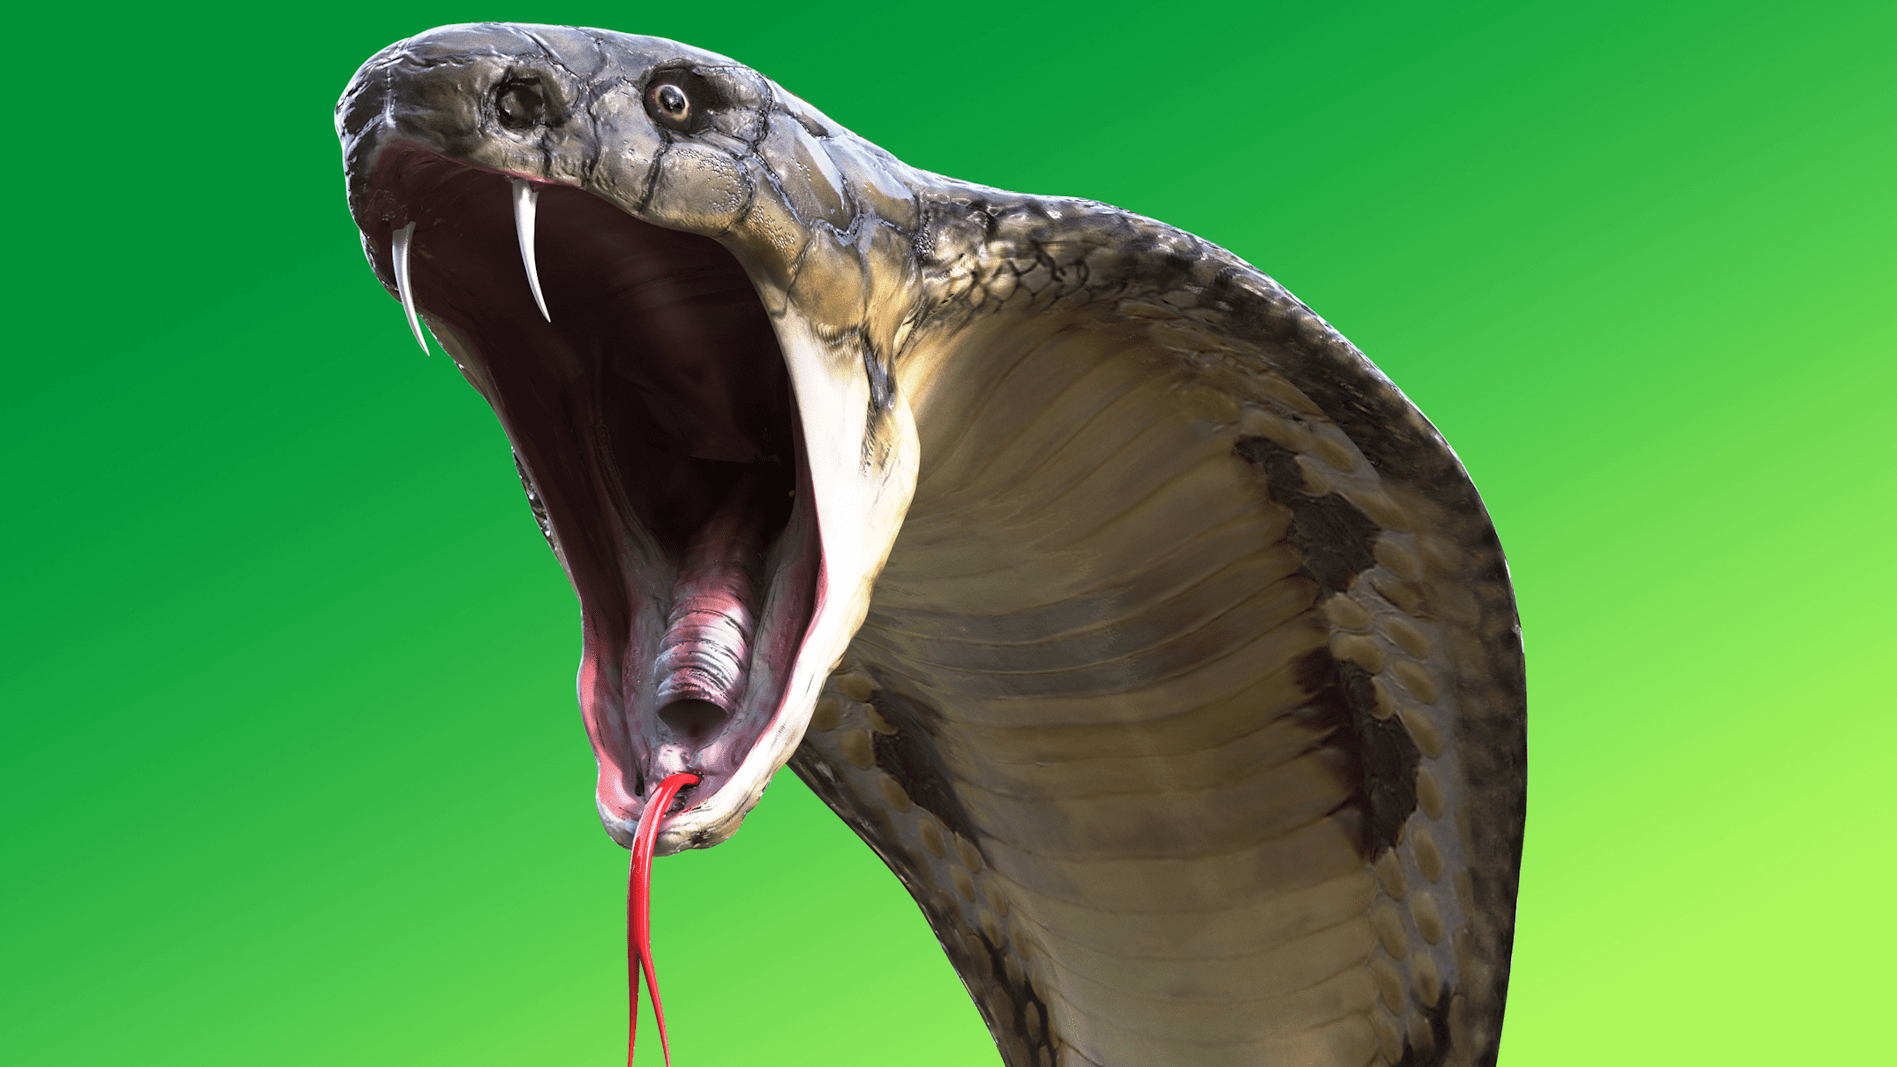 What Types Of Venomous Snakes Should Dog Owners Be Aware Of In Virginia